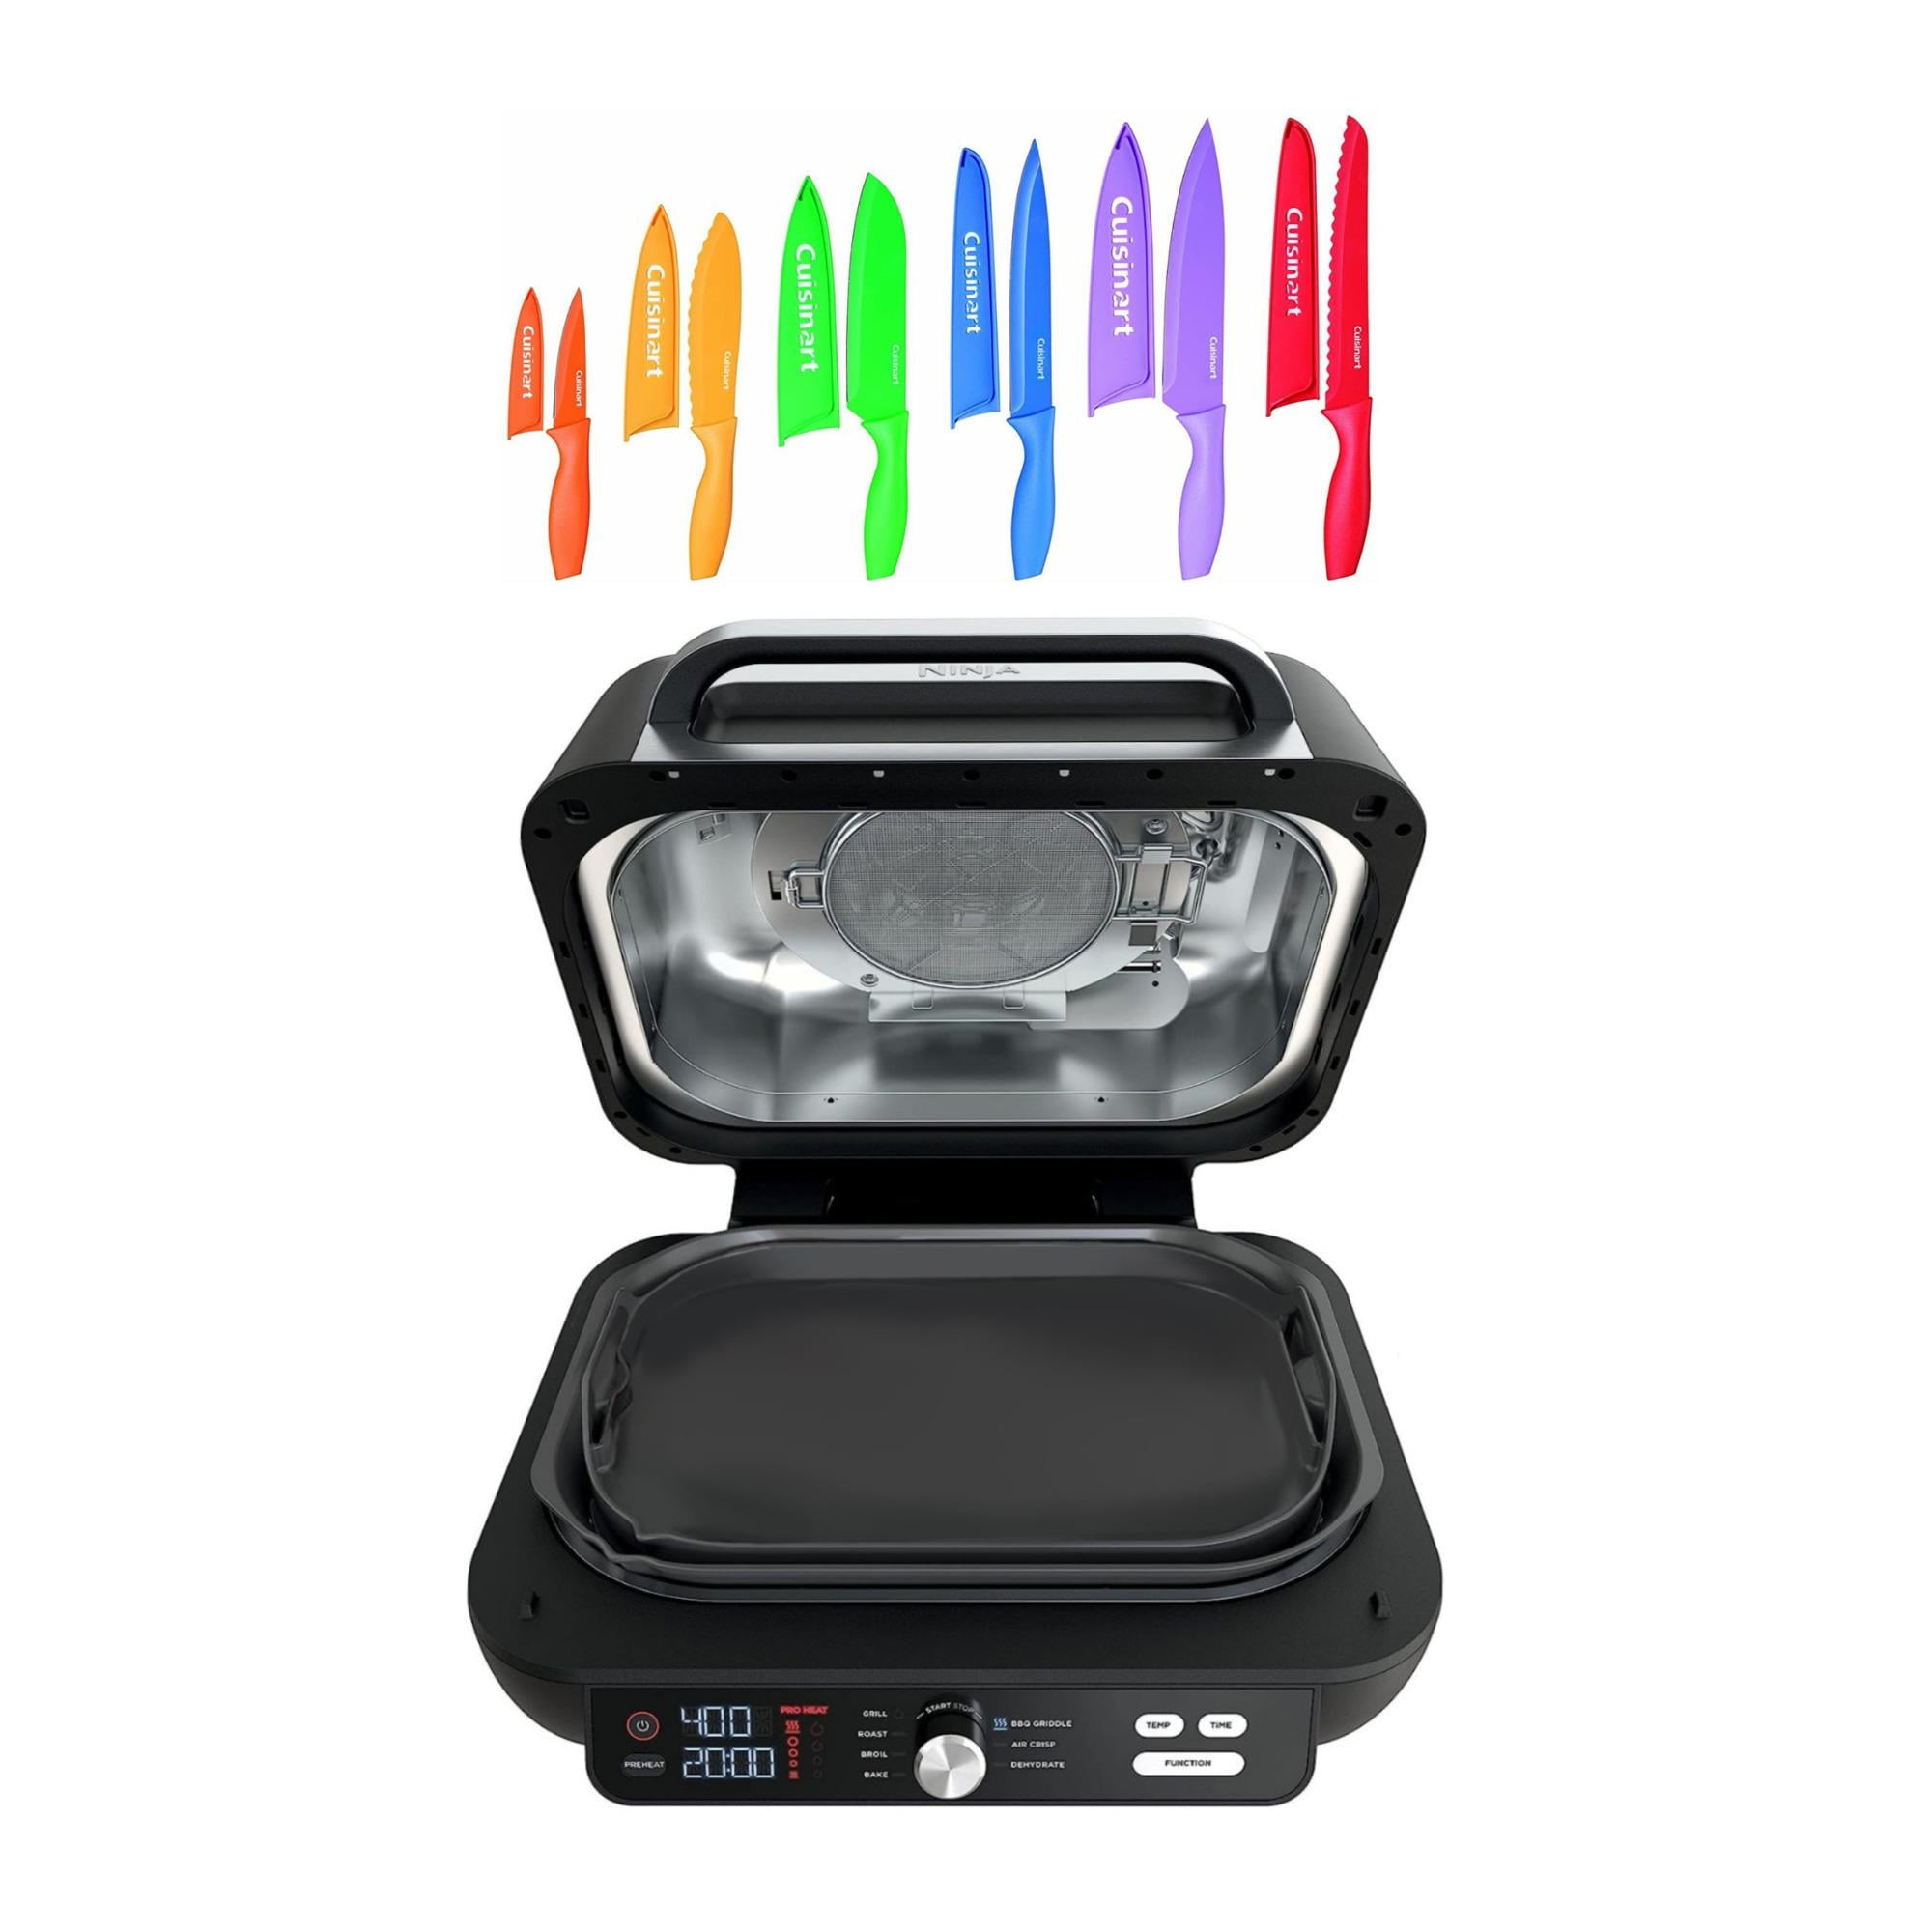 Ninja IG601 Foodi XL Pro 7-in-1 Grill & Griddle Pans - Black. Comes With 2  Trays 622356575751